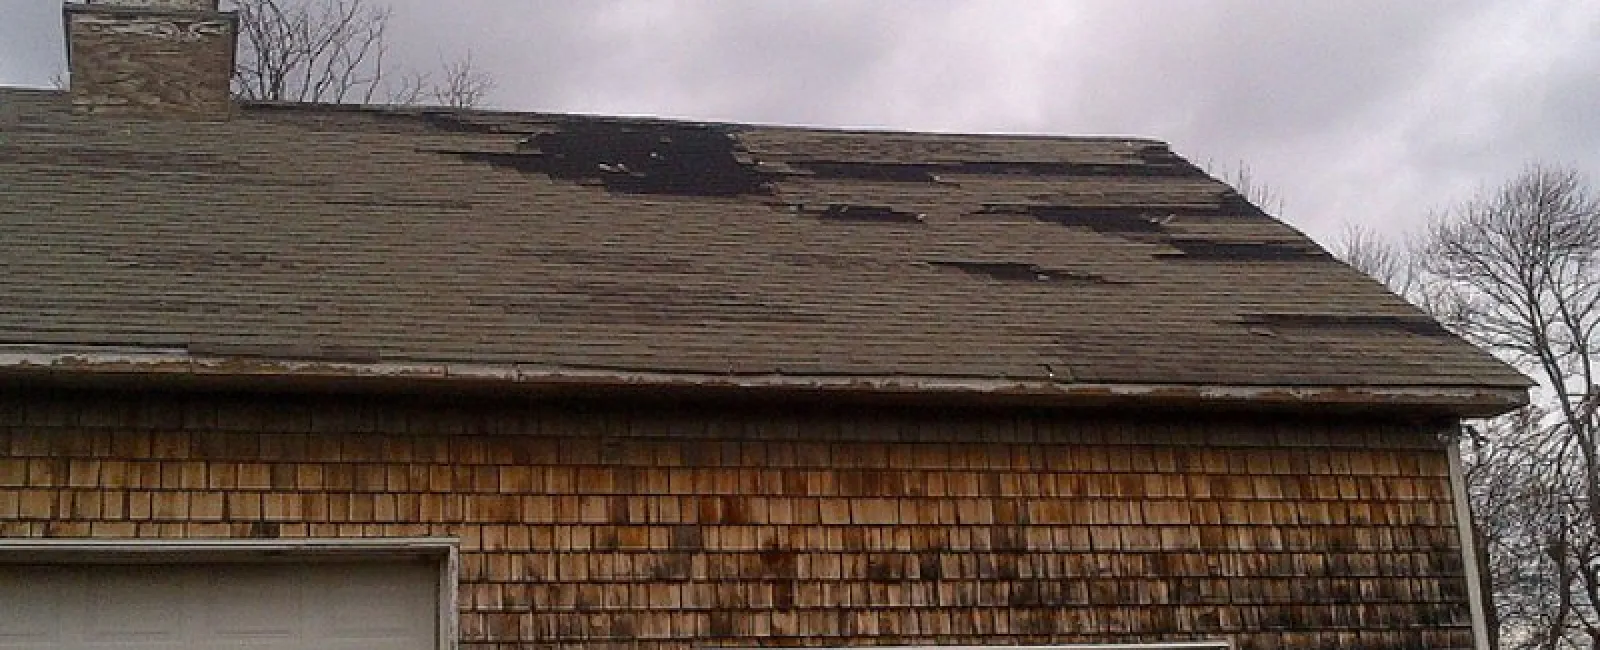 5 Reasons to Look Into Roofing Repair ASAP